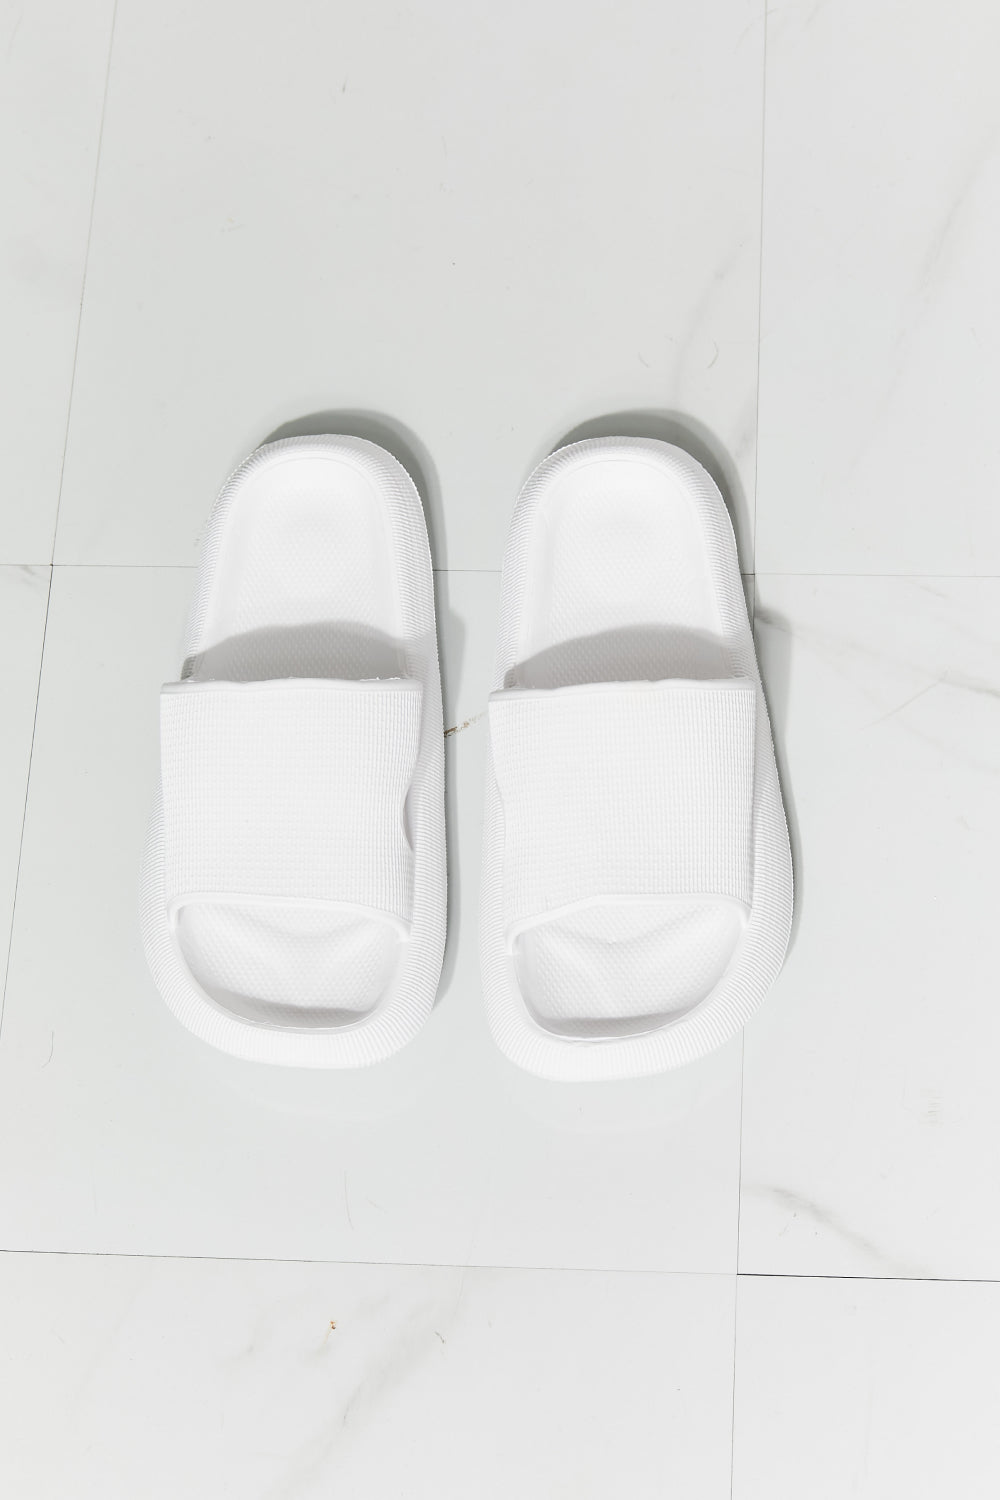 MMShoes Arms Around Me Open Toe Slide in White - T4x Quadruple Love